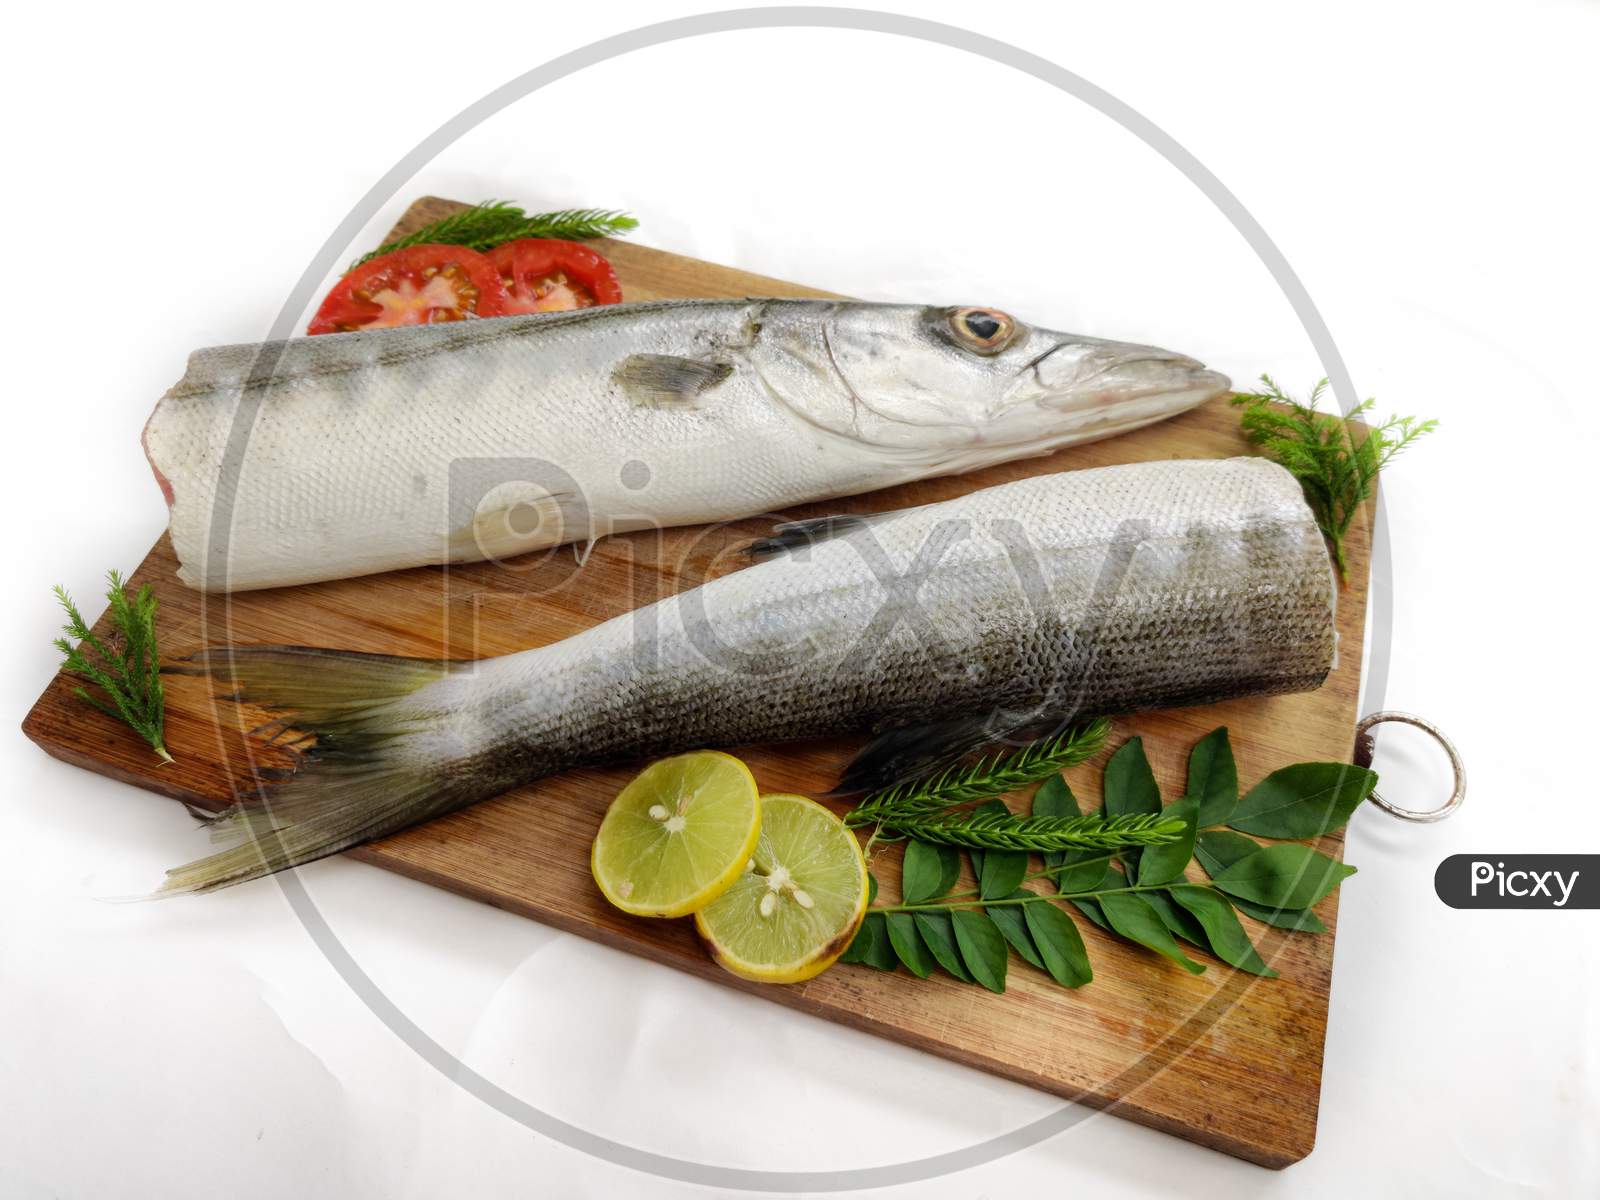 Fresh Raw Barracuda Fish (Cheelavu) Head And Body Decorated With Herbs And Vegetables On A White Background.Selective Focus.